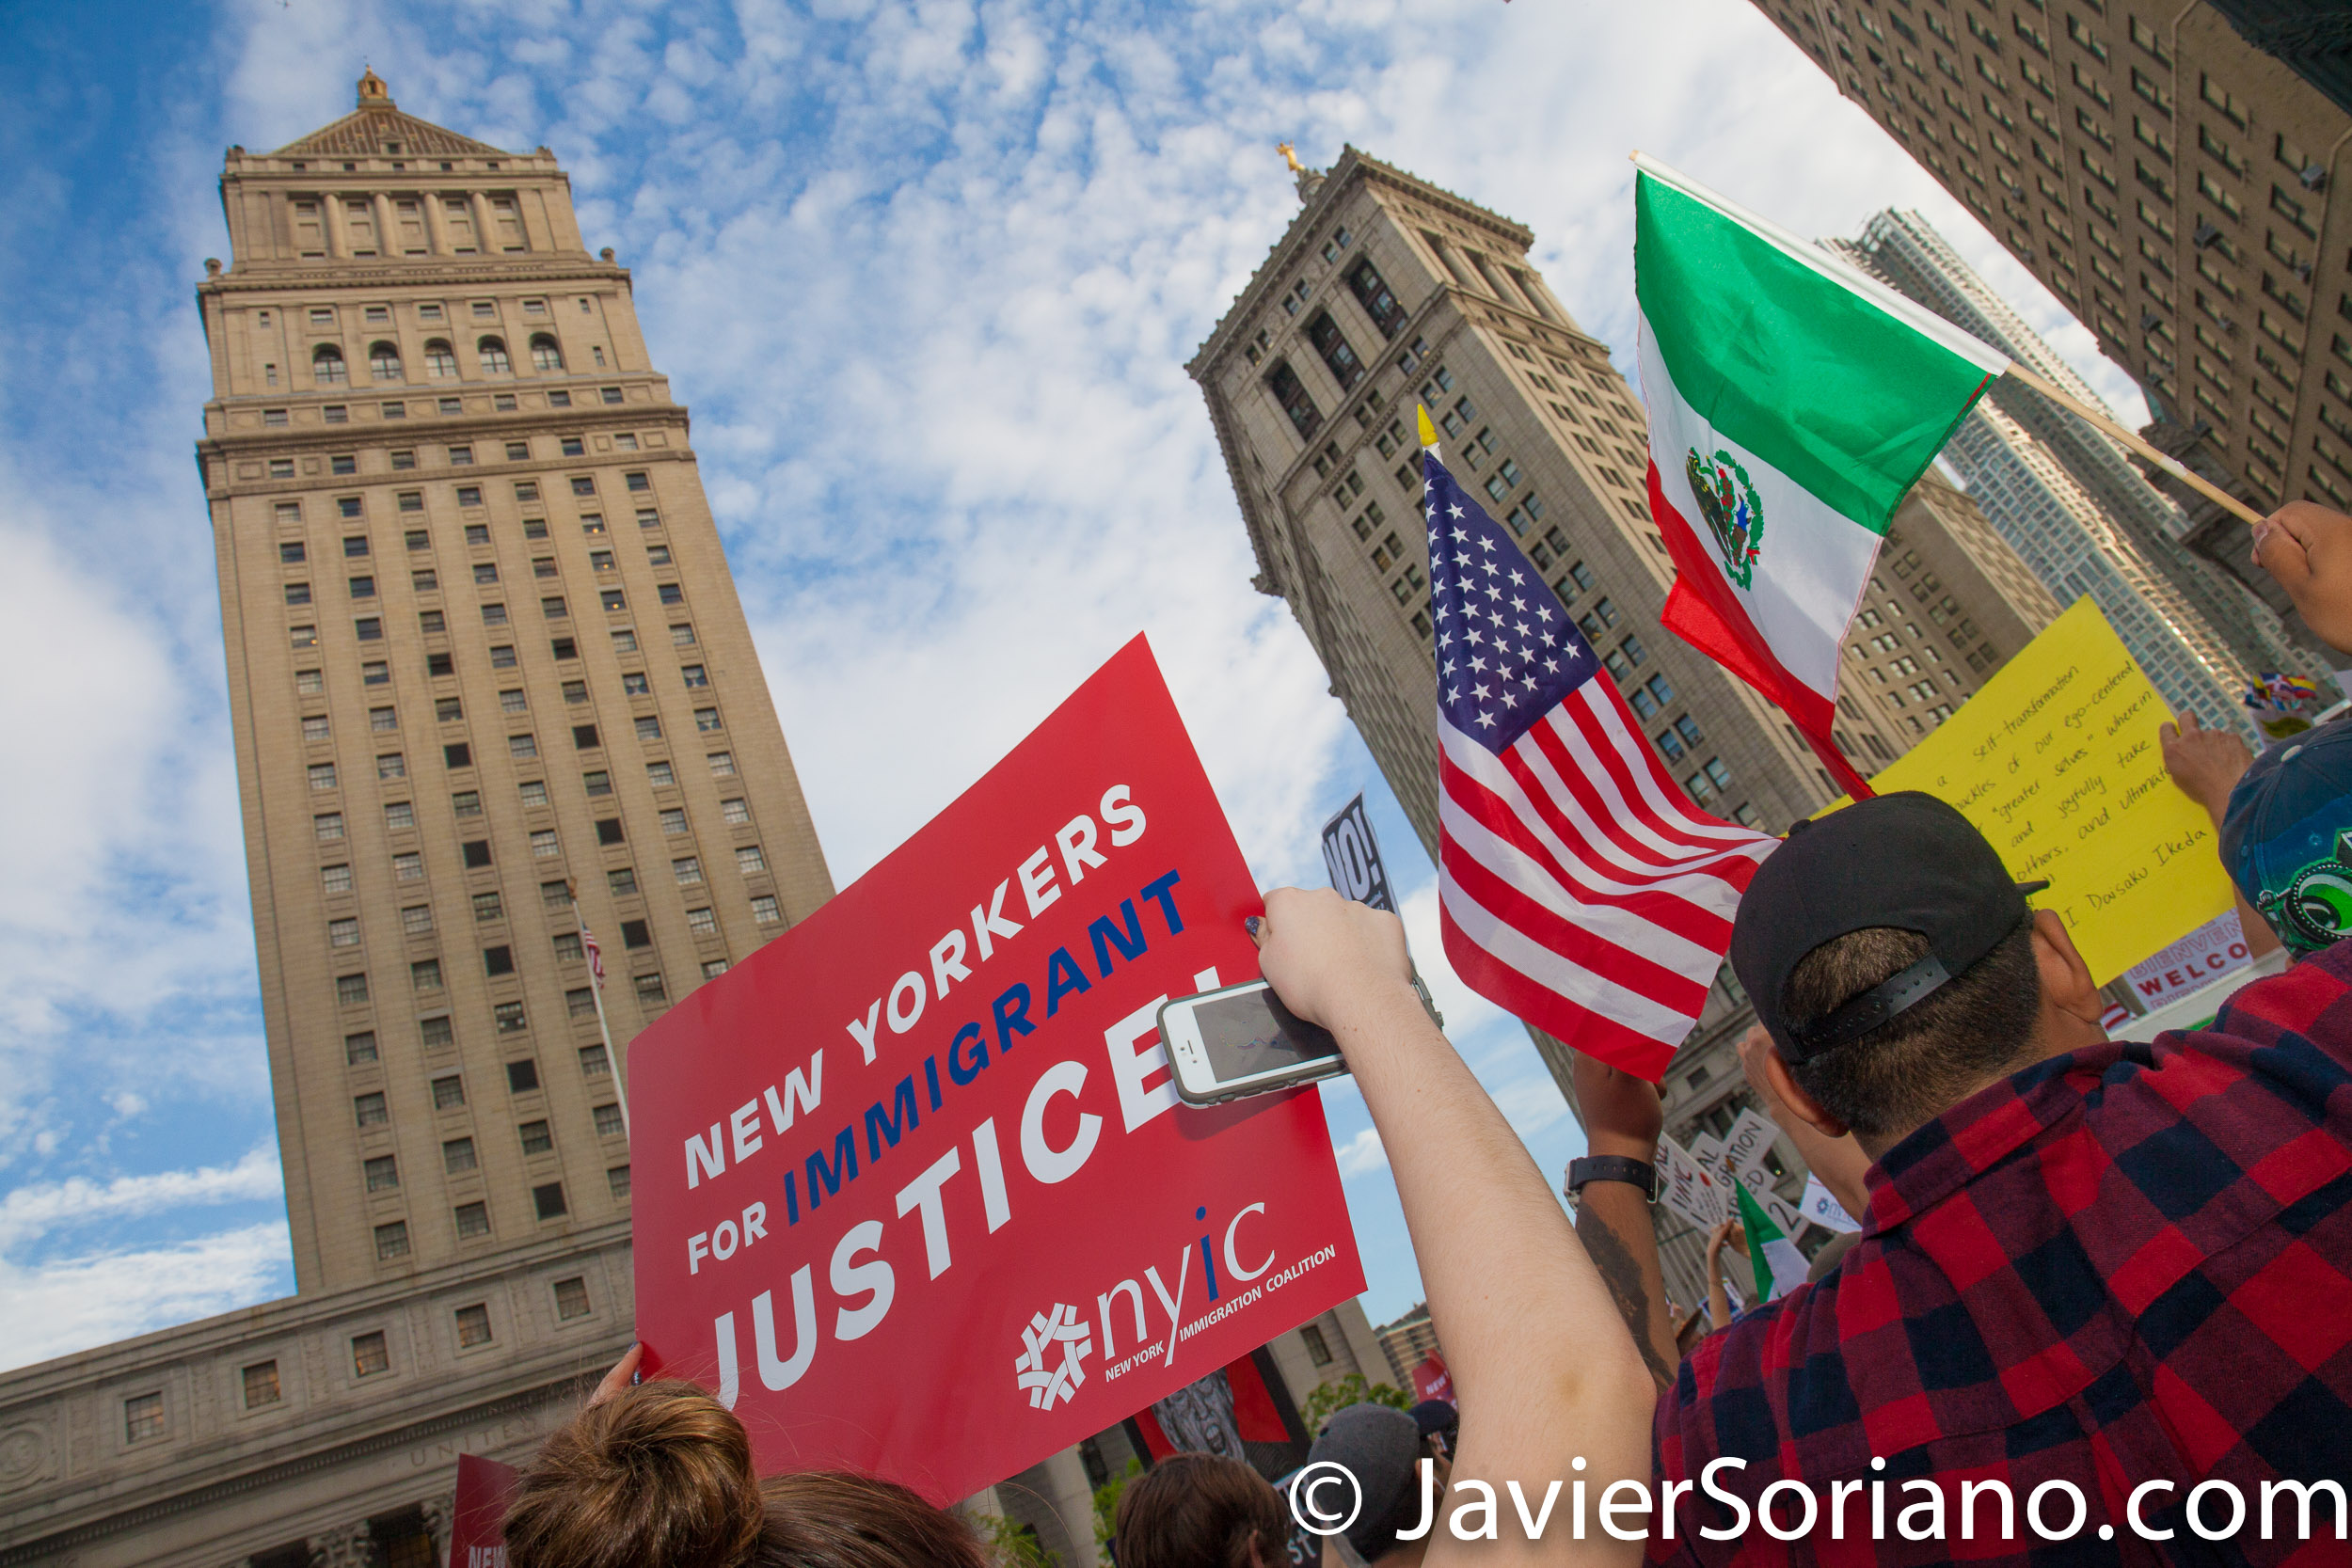 5/01/2017 Foley Square Park, NYC - International Workers’ Day (MAYDAY). Photo by Javier Soriano/www.JavierSoriano.com